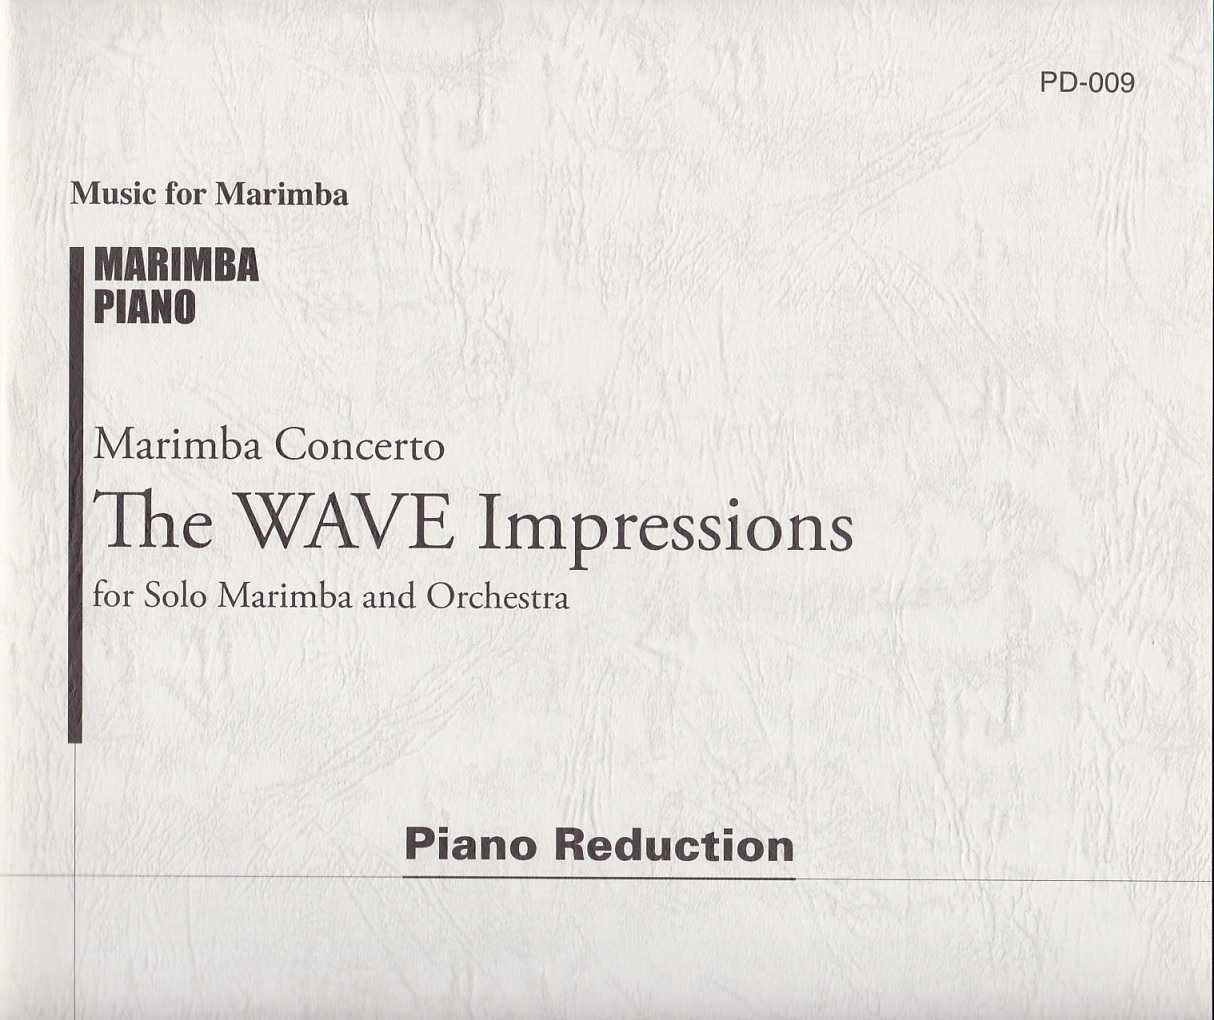 The Wave Impressions for Solo Marimba and Piano (Orch.) by Keiko Abe